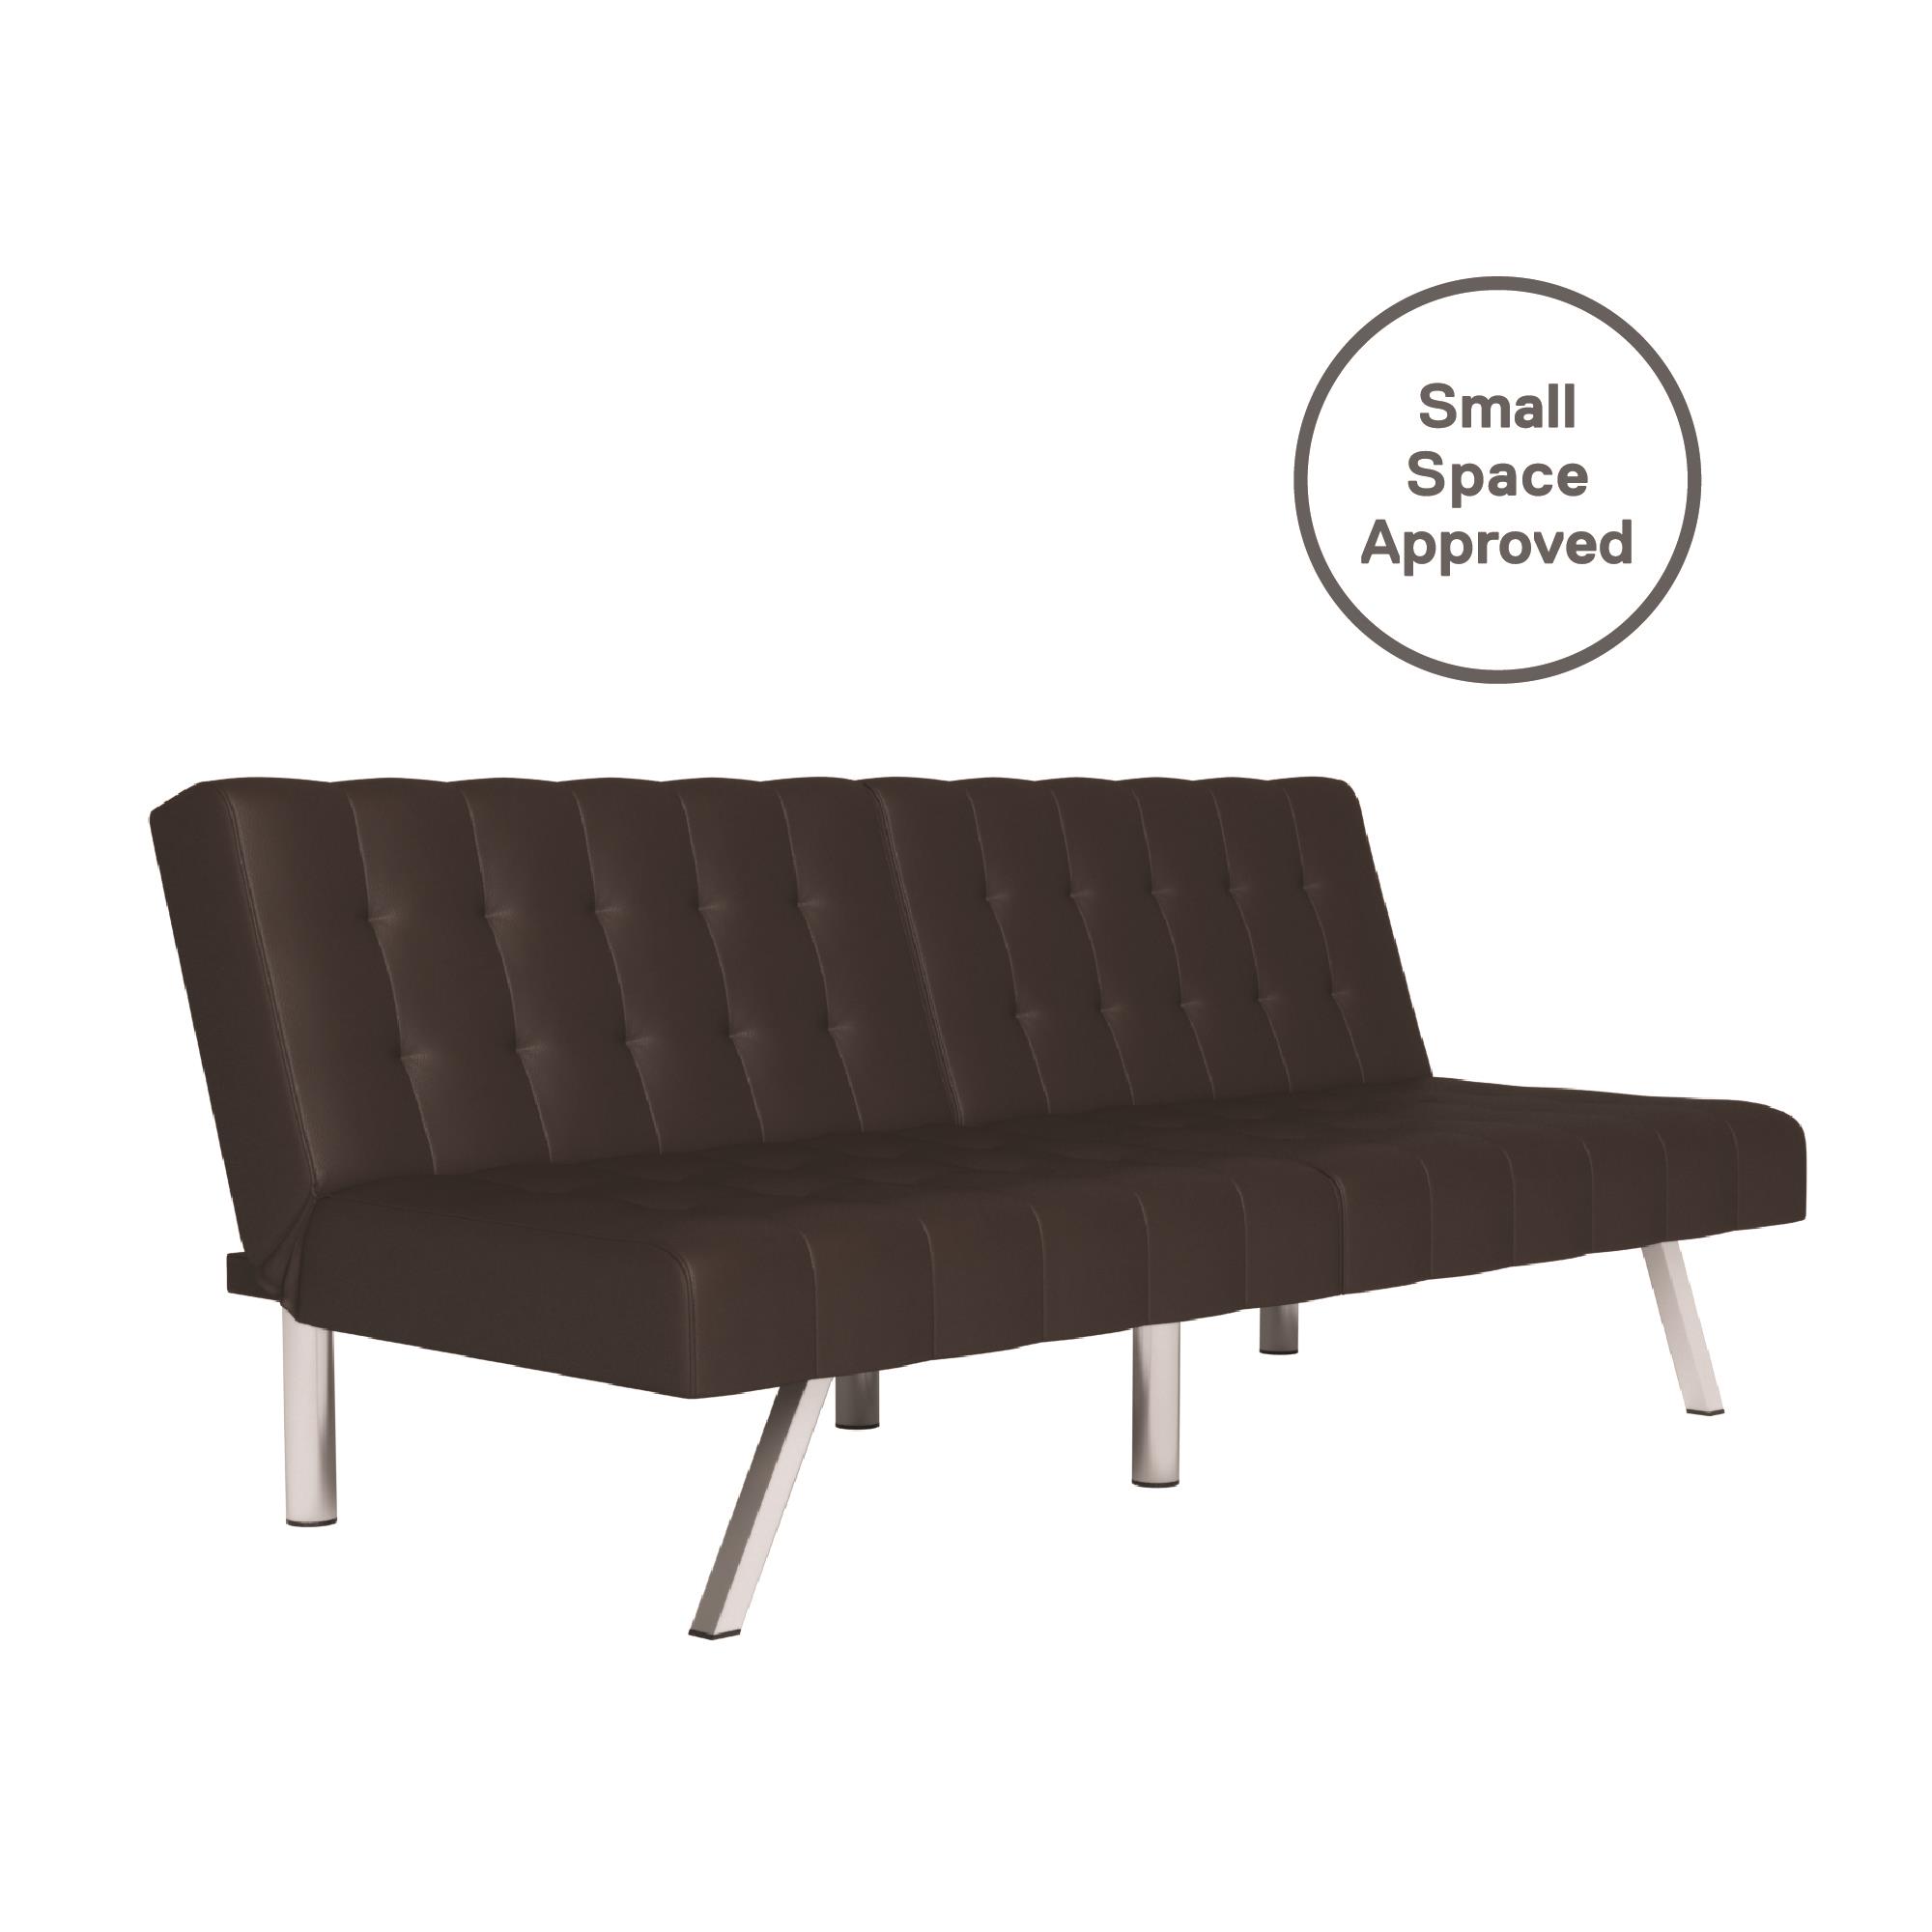 Mainstays Morgan Futon, Brown Faux Leather - image 4 of 15